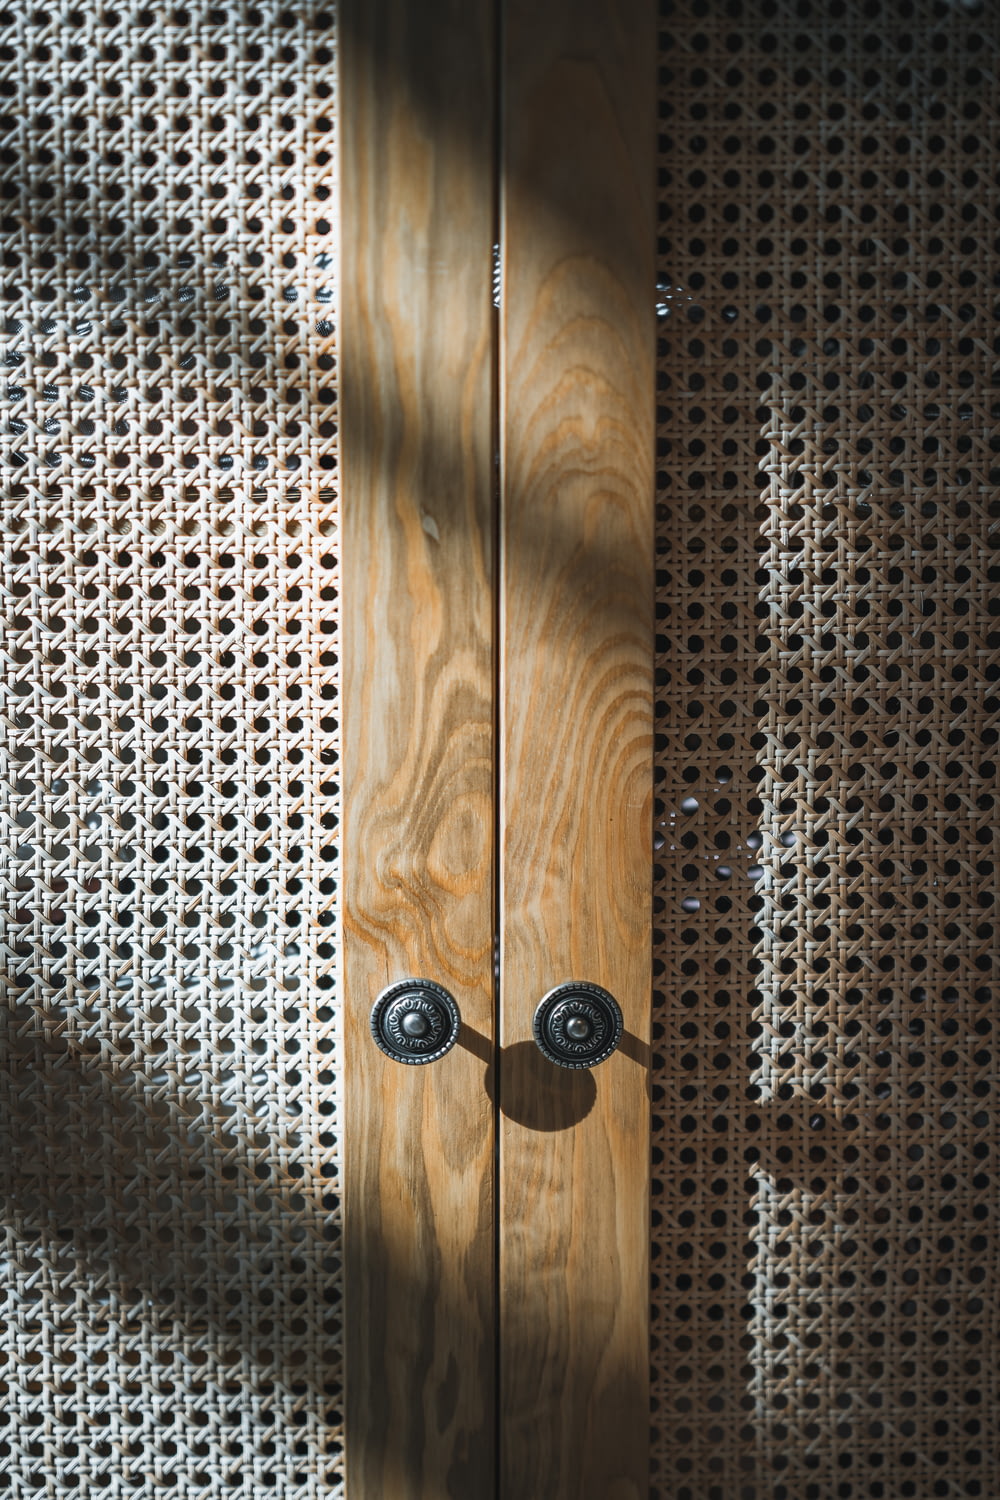 a wooden door with two knobs on it